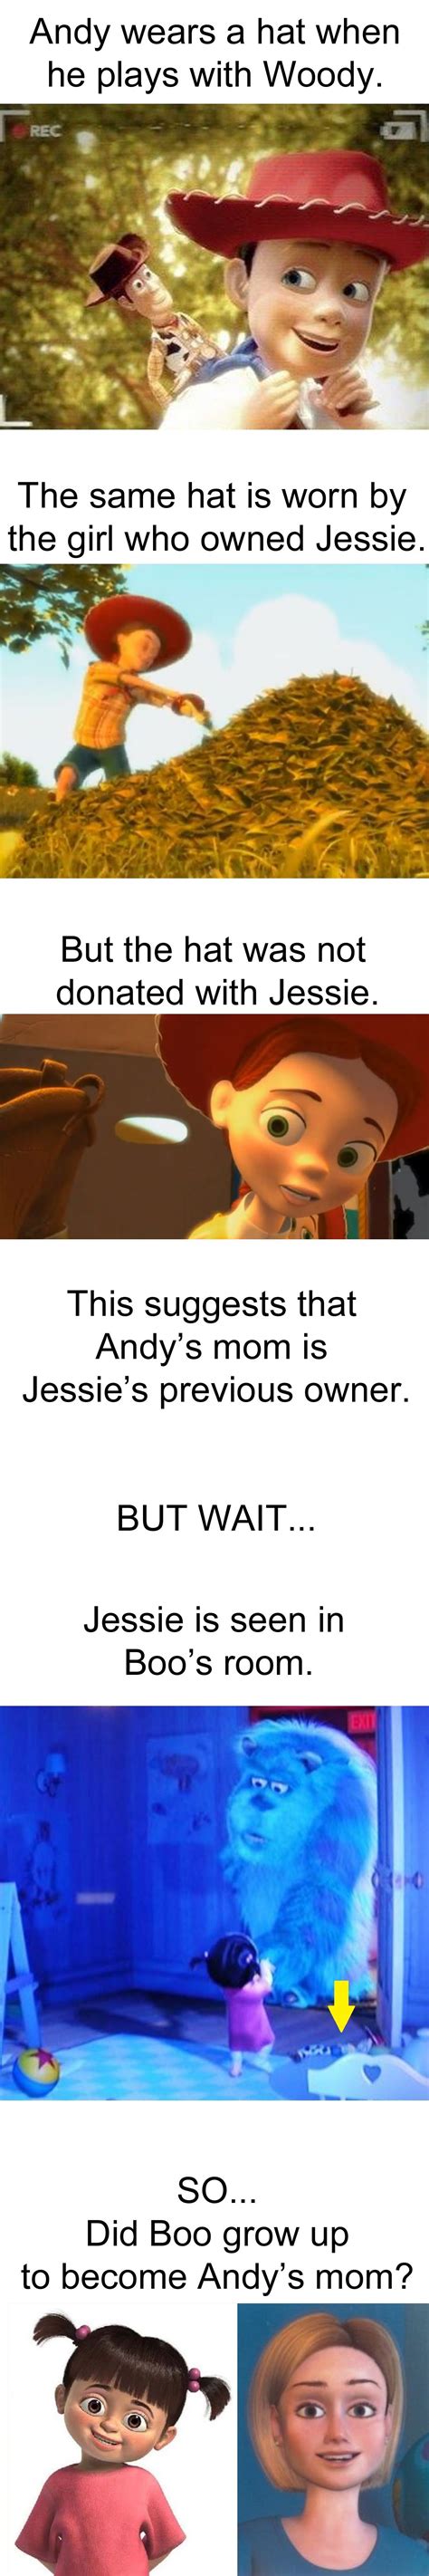 Did Boo From Monsters Inc Grow Up To Become Andys Mom In Toy Story No Probably Not Humour